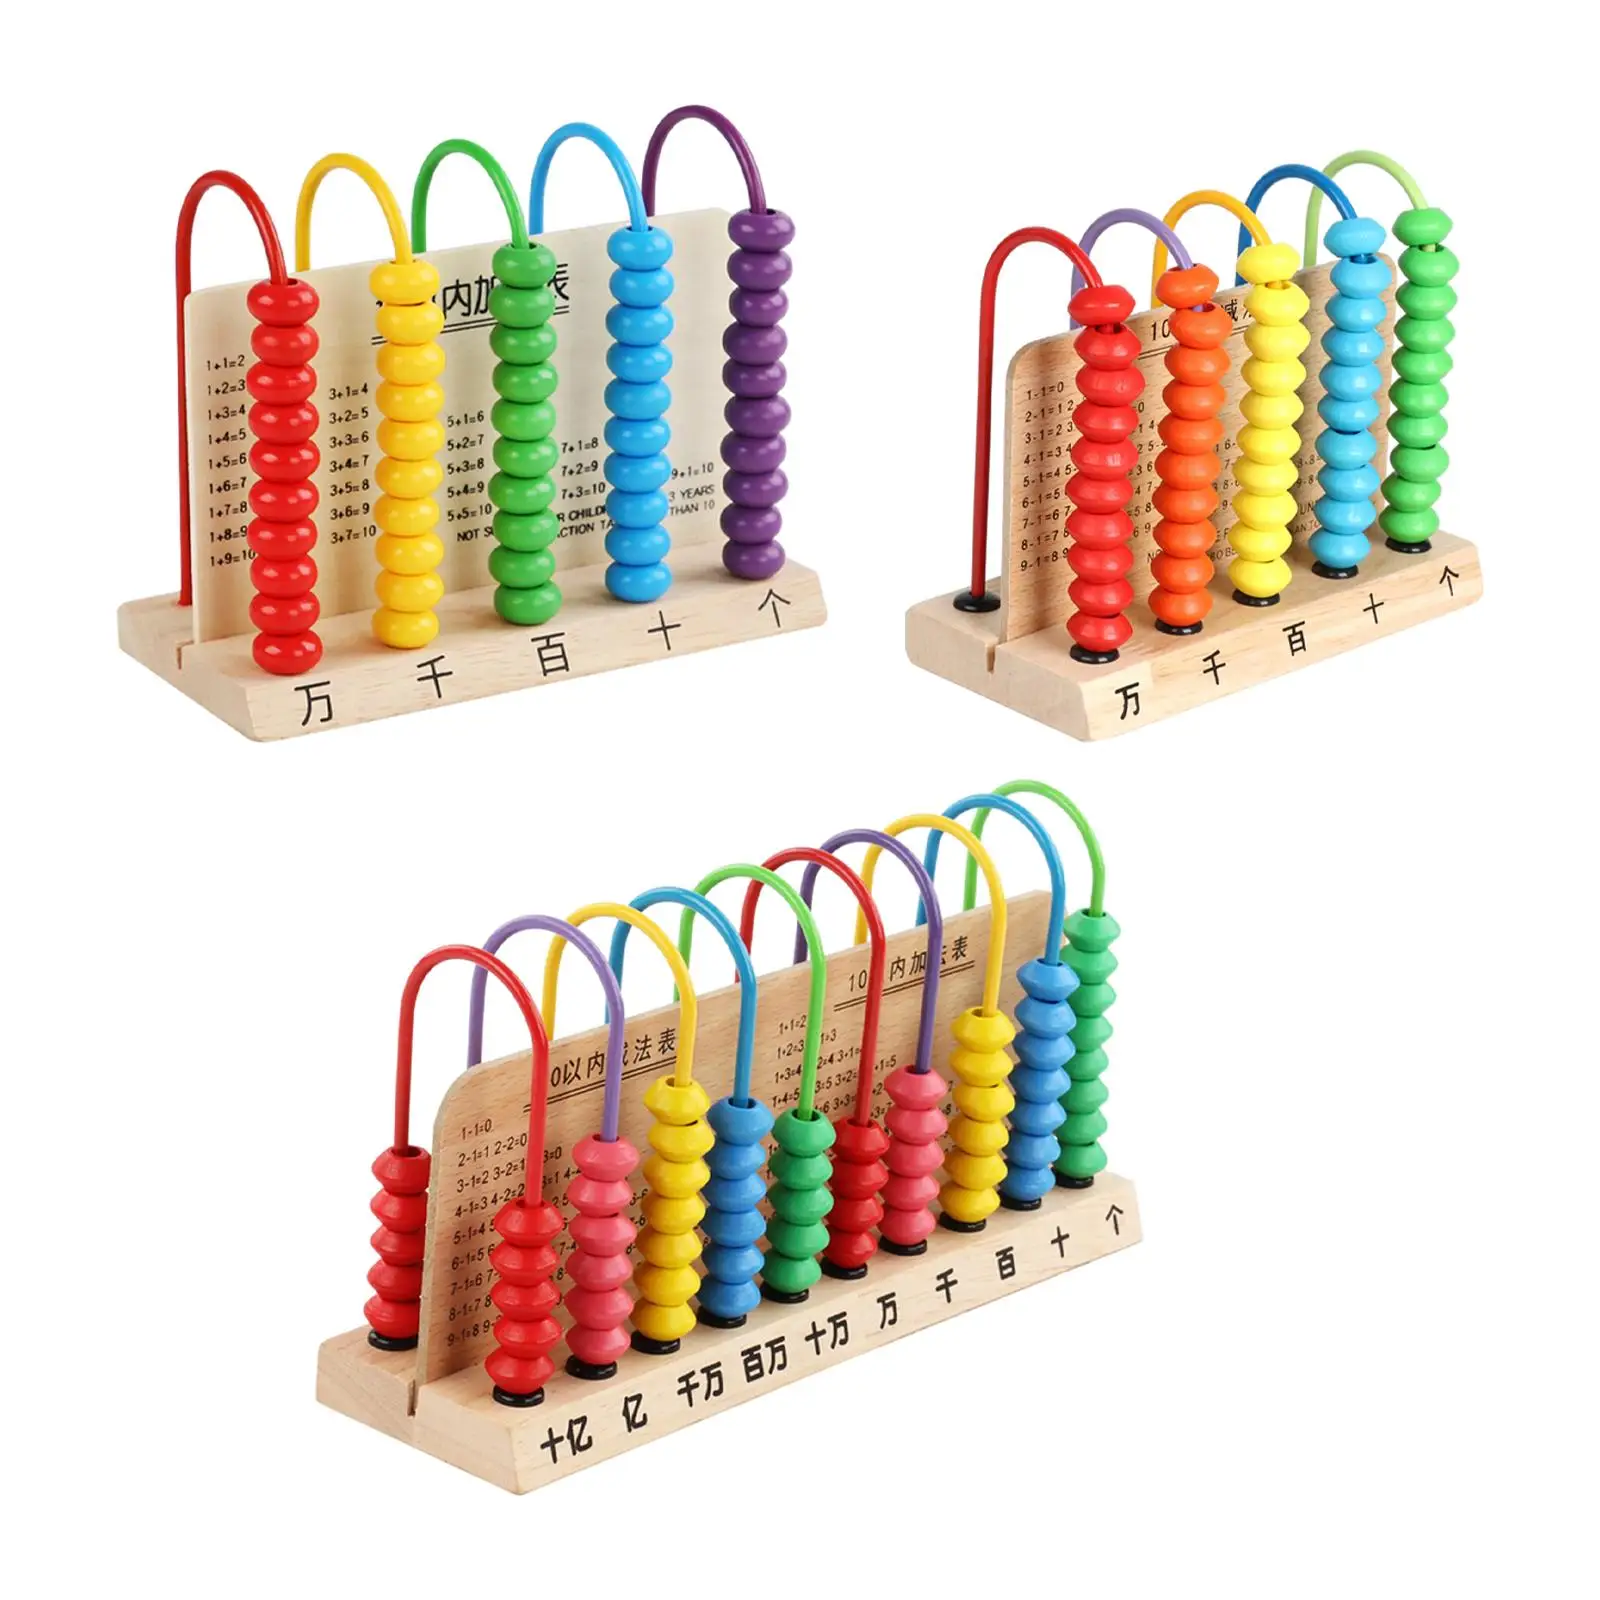 Counting Abacus Toy Wooden Add Subtract Abacus for Baby Children Toddlers